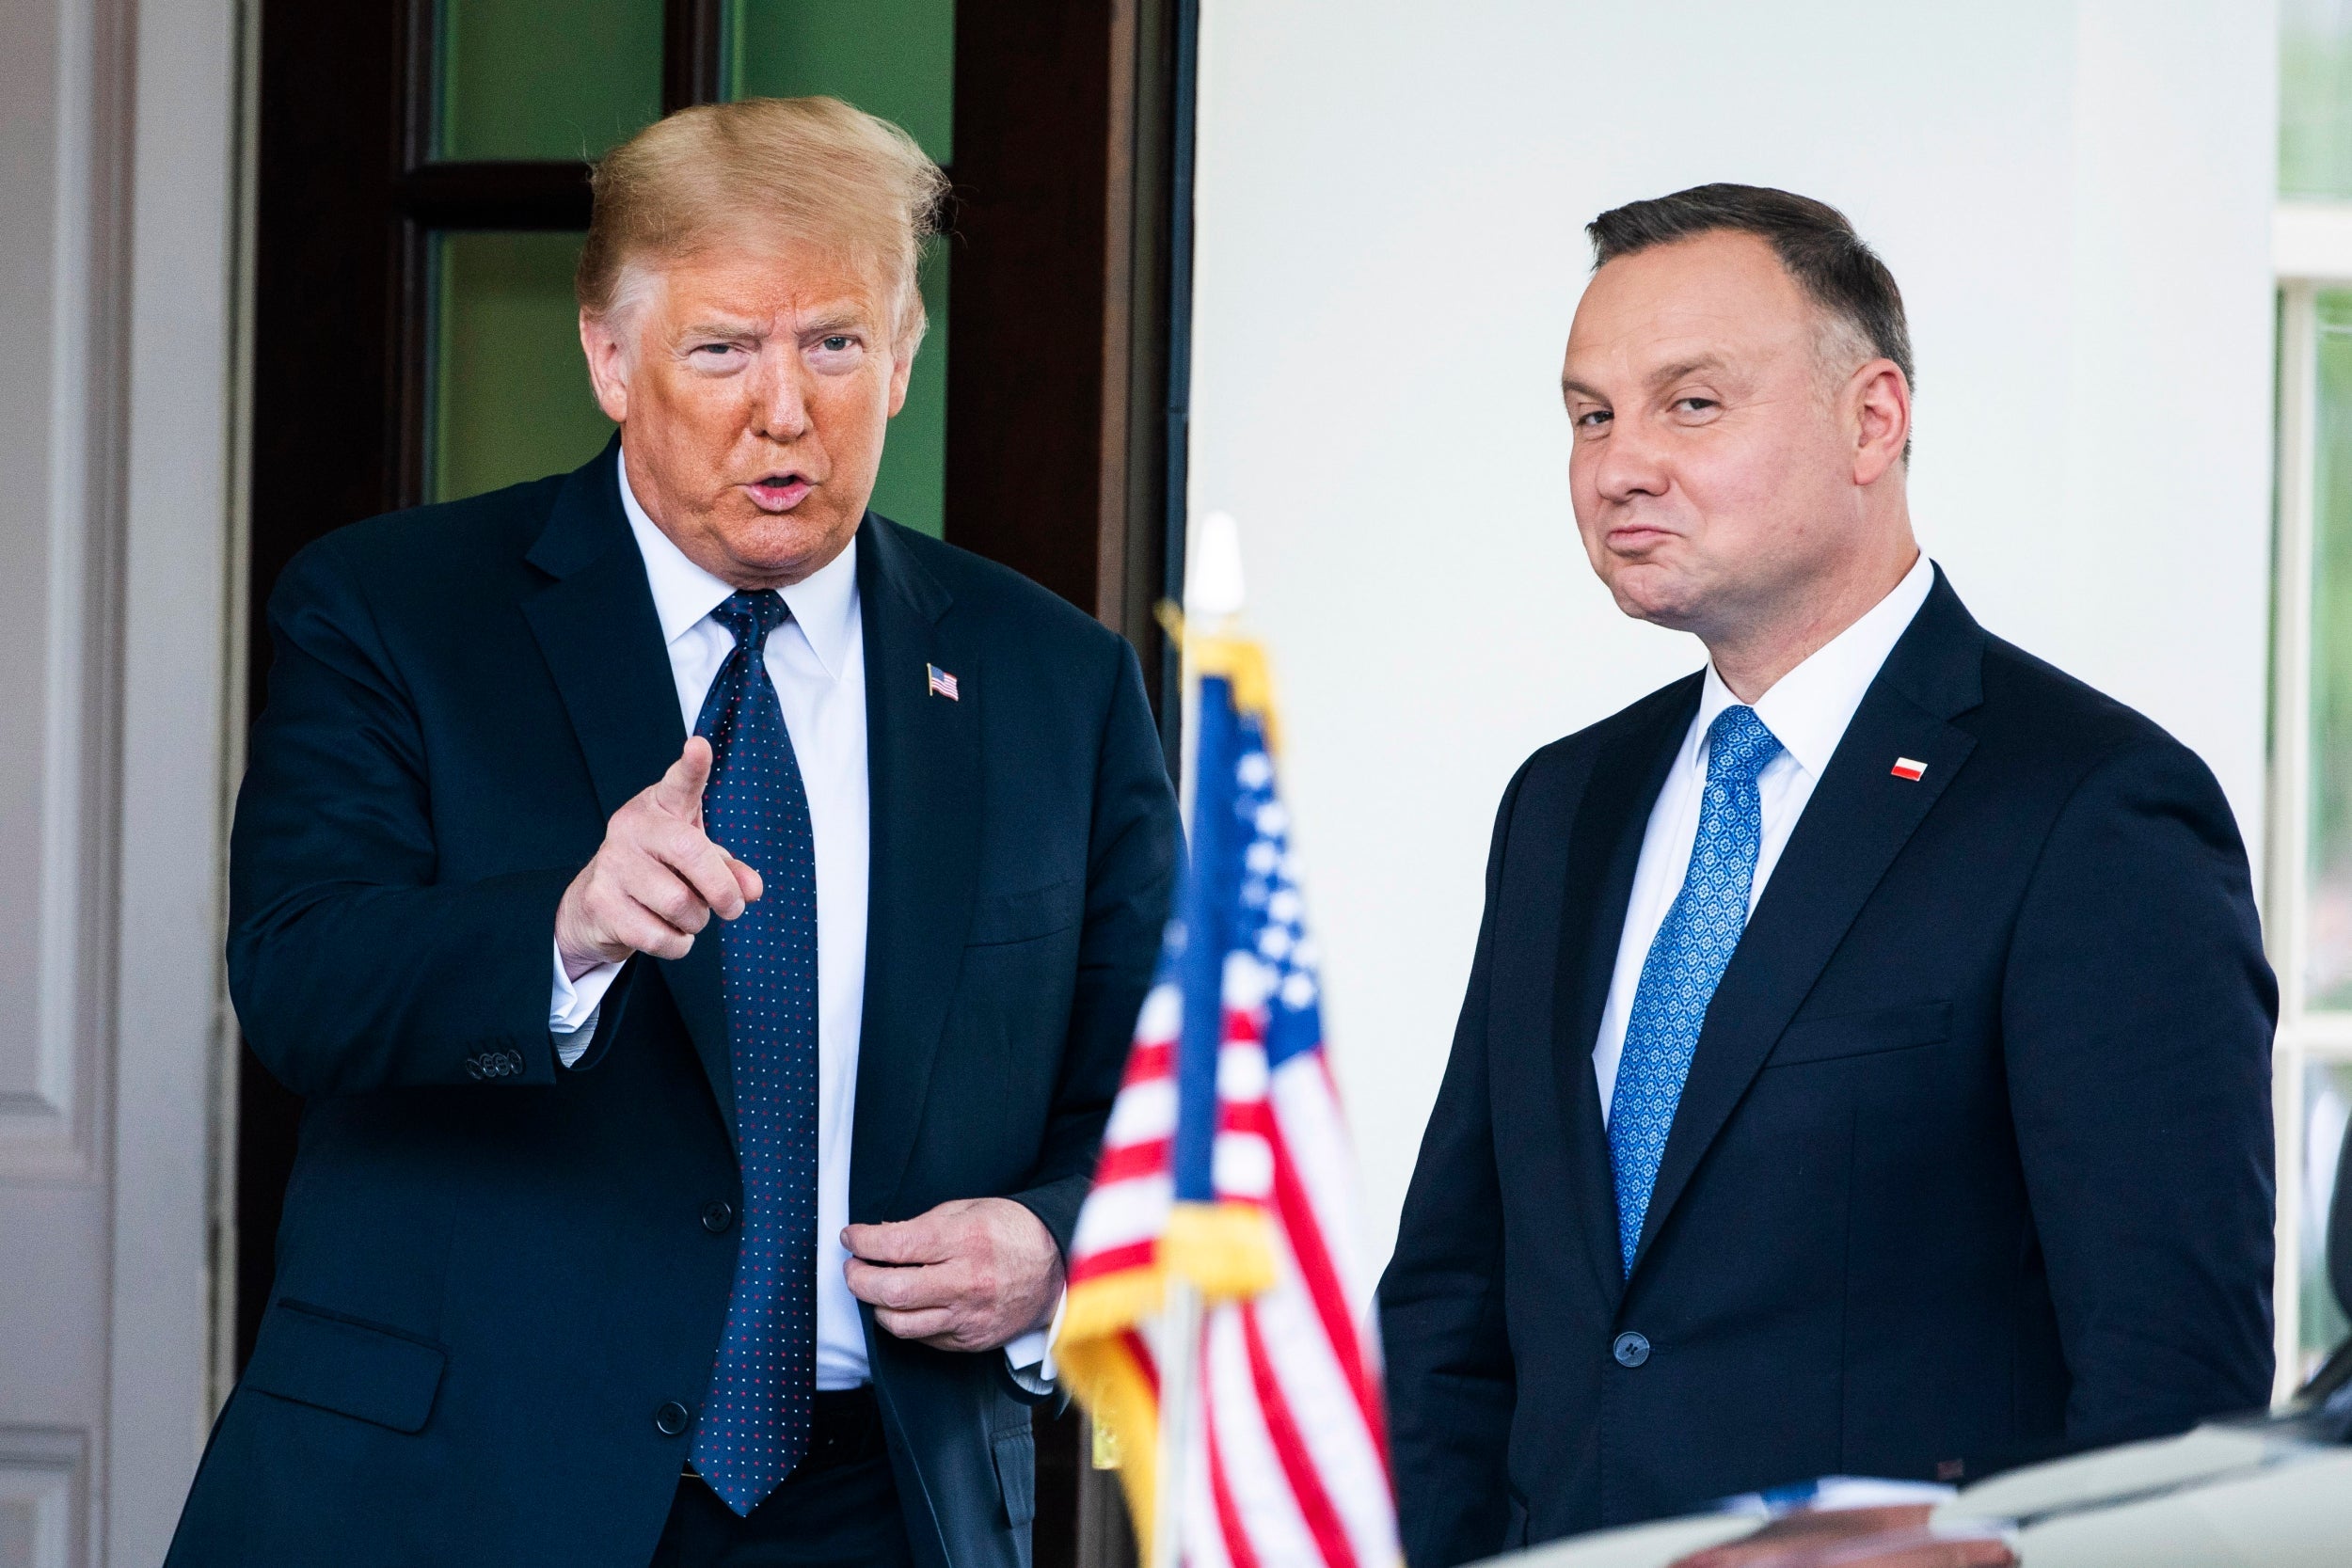 The Polish president visited his US counterpart in the White House on Wednesday